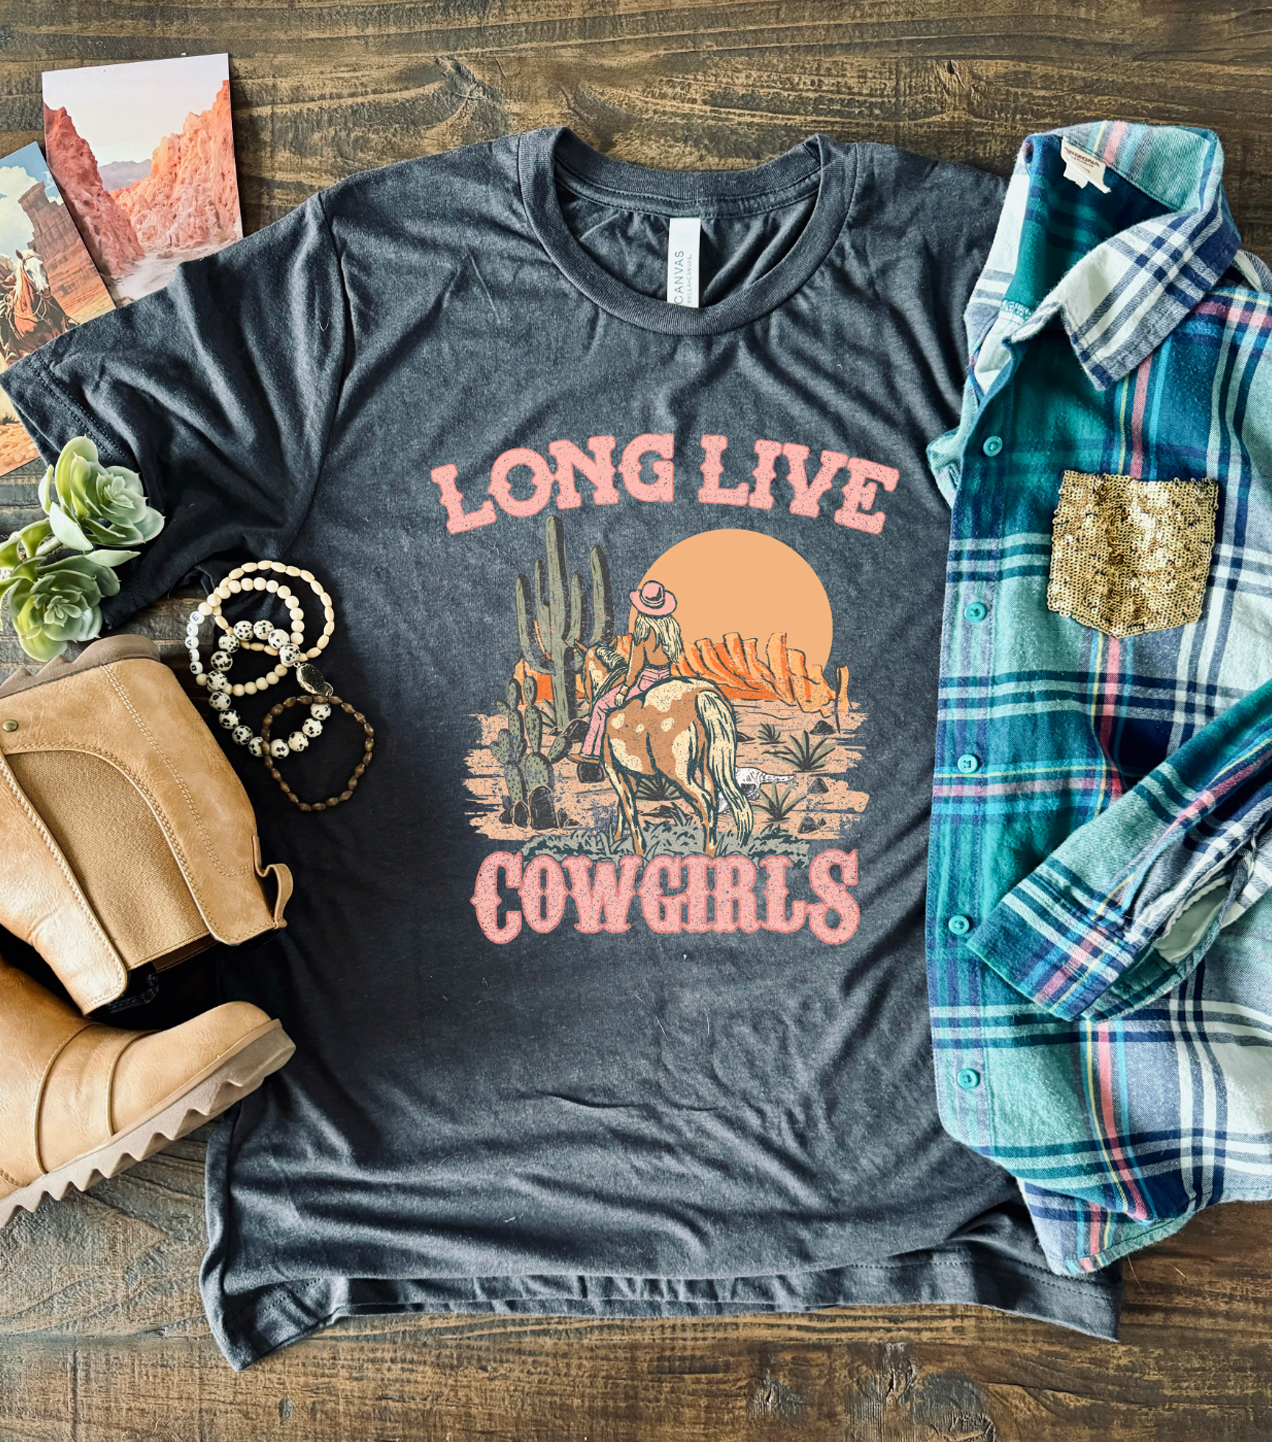 Long Live Cowgirls vintage tee on a super soft charcoal colored unisex tee shown with flannel.